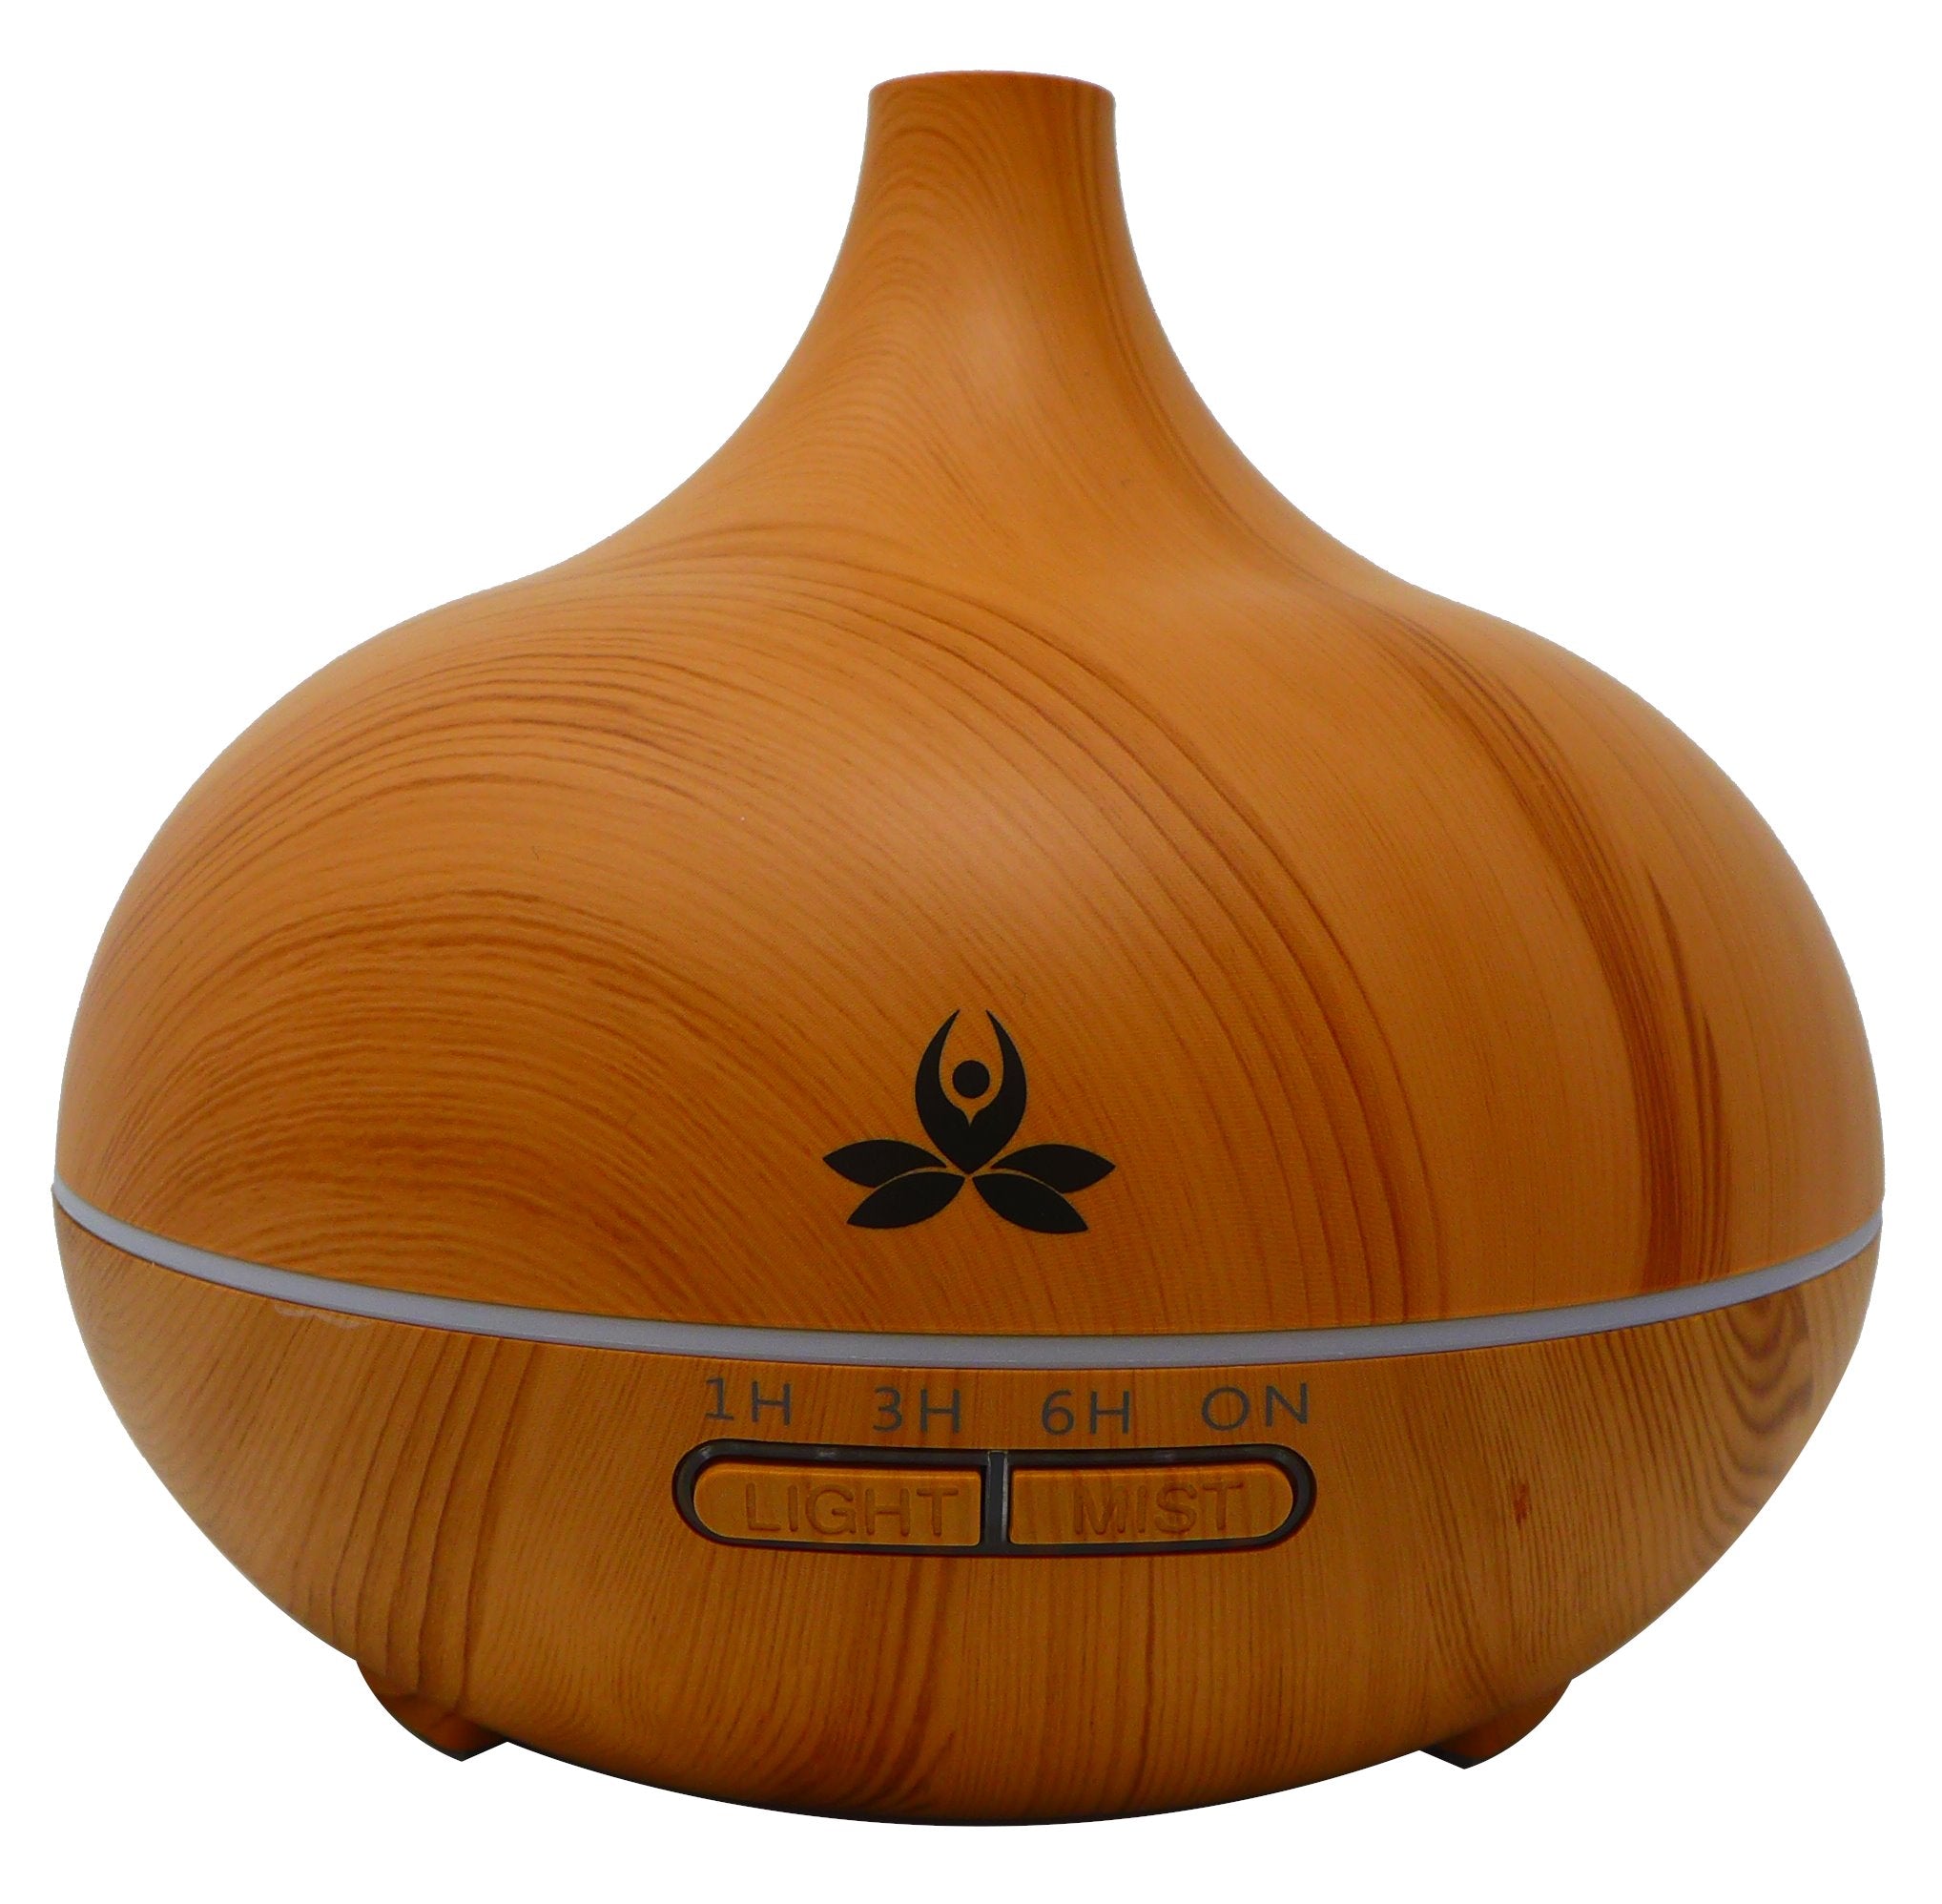 Essential Oil Diffuser For Home Or Office (Shanthi) Electronic Diffuser Light brown 